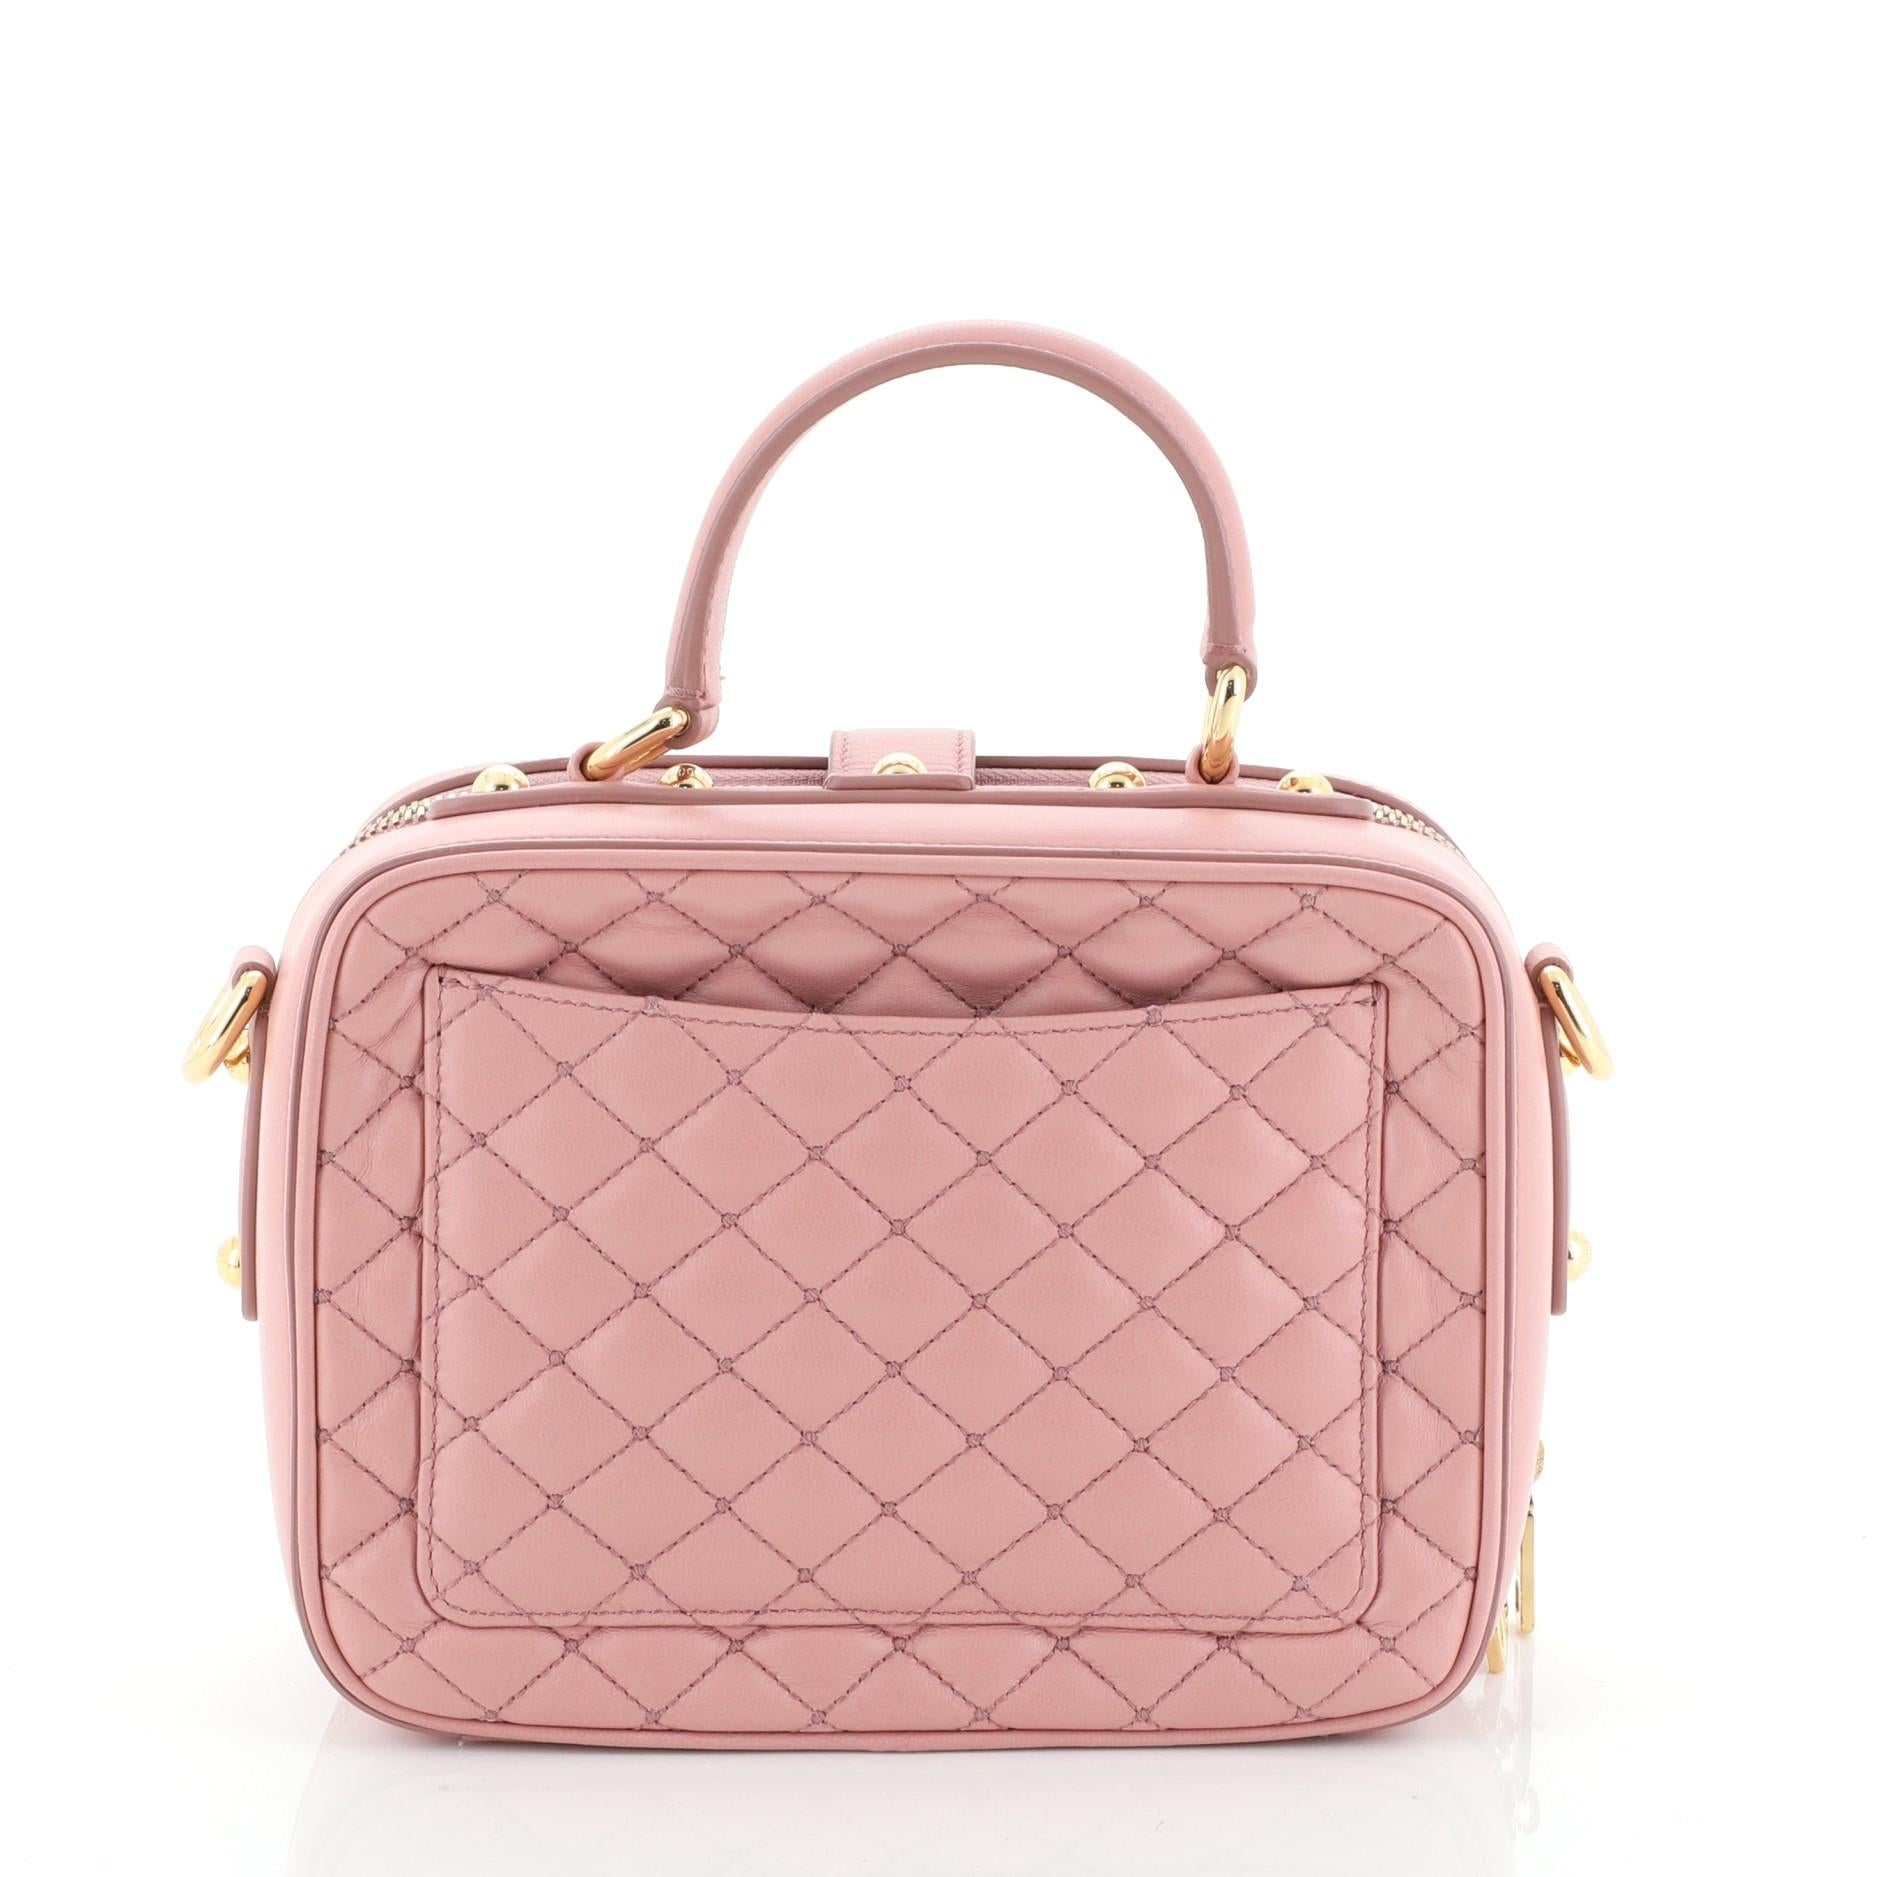 dolce gabbana quilted bag